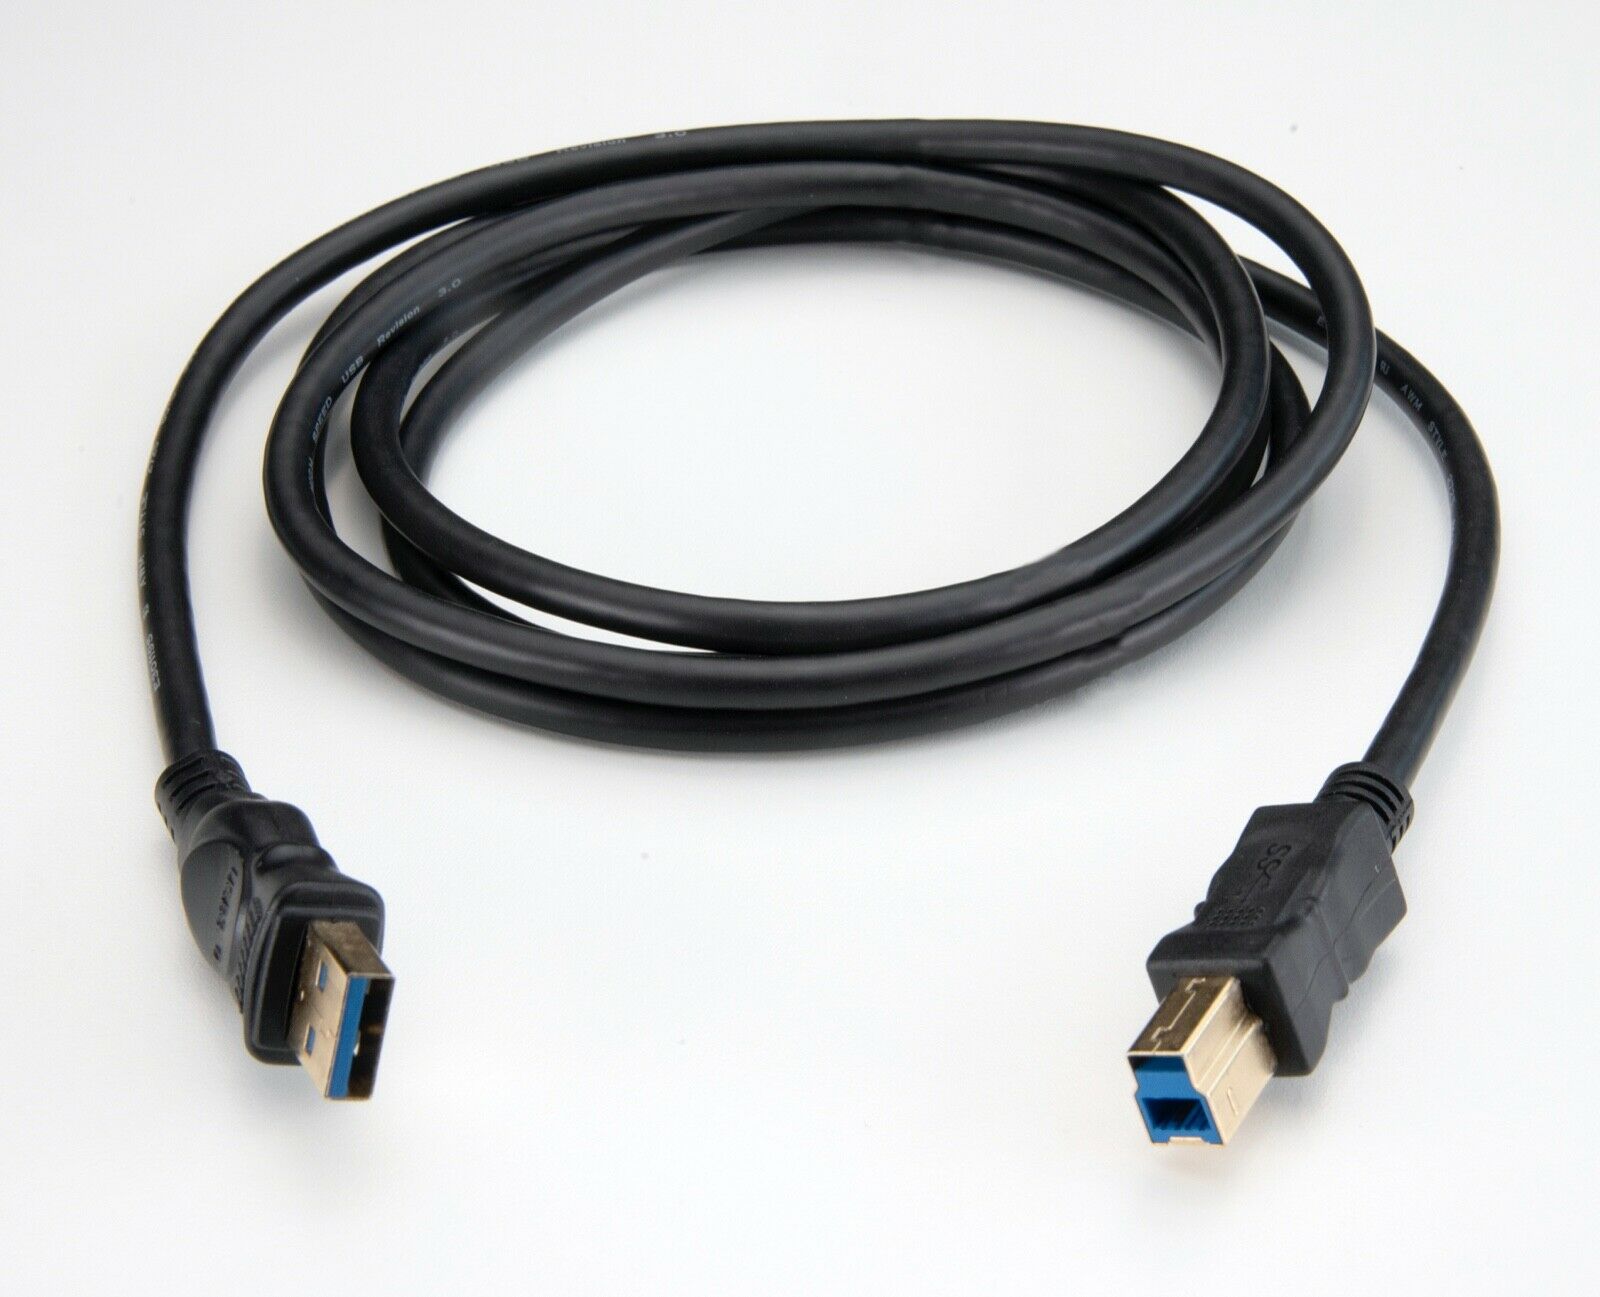 6ft Gold-Plated USB 3.0 Type A Male to B Male Cable for Printer Scanner Camera